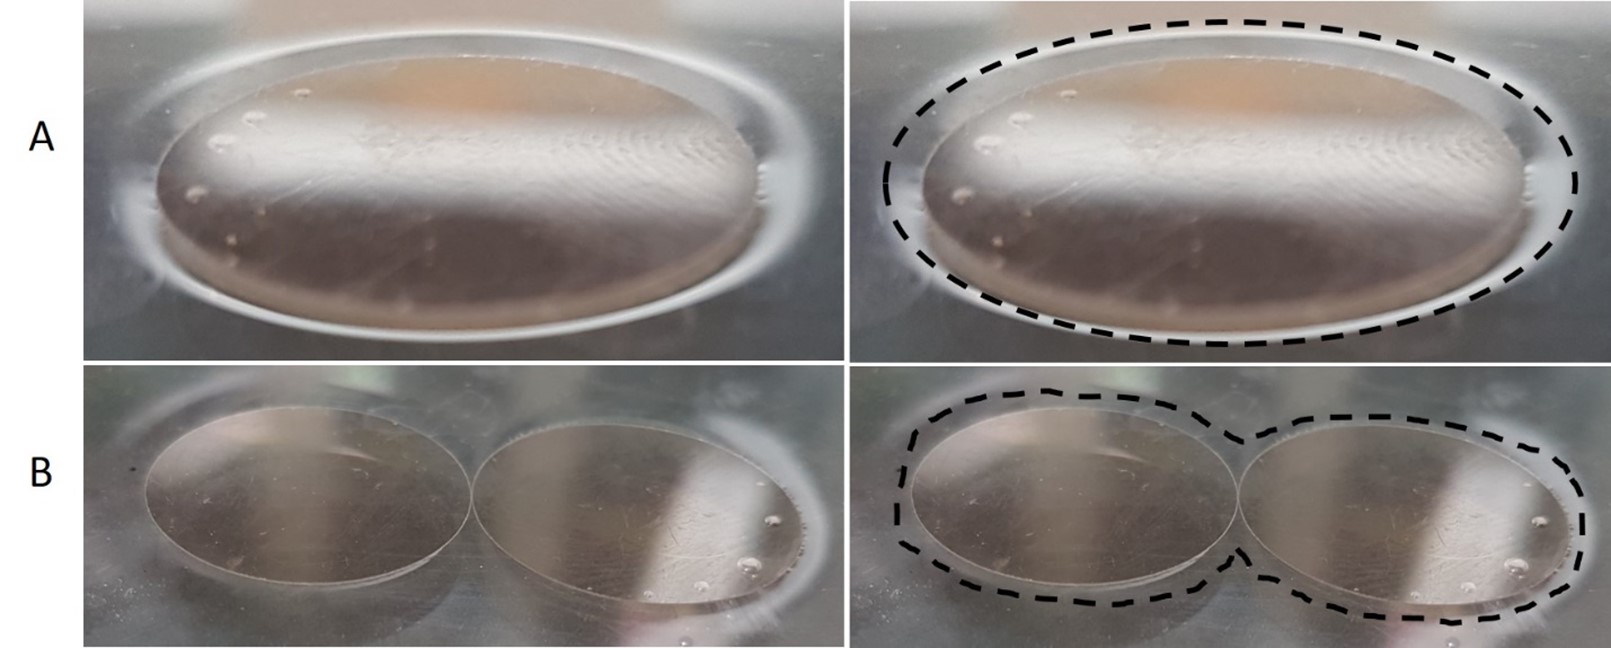 A panel of four images showing circular mica disks (brown) on the surface of water. The discs create an indentation on the water surface that is identified with a dashed black line. The two images in the bottom half of the panel show two mica discs touching side-by-side, with the water indentation identified with a dashed black line around the two discs.